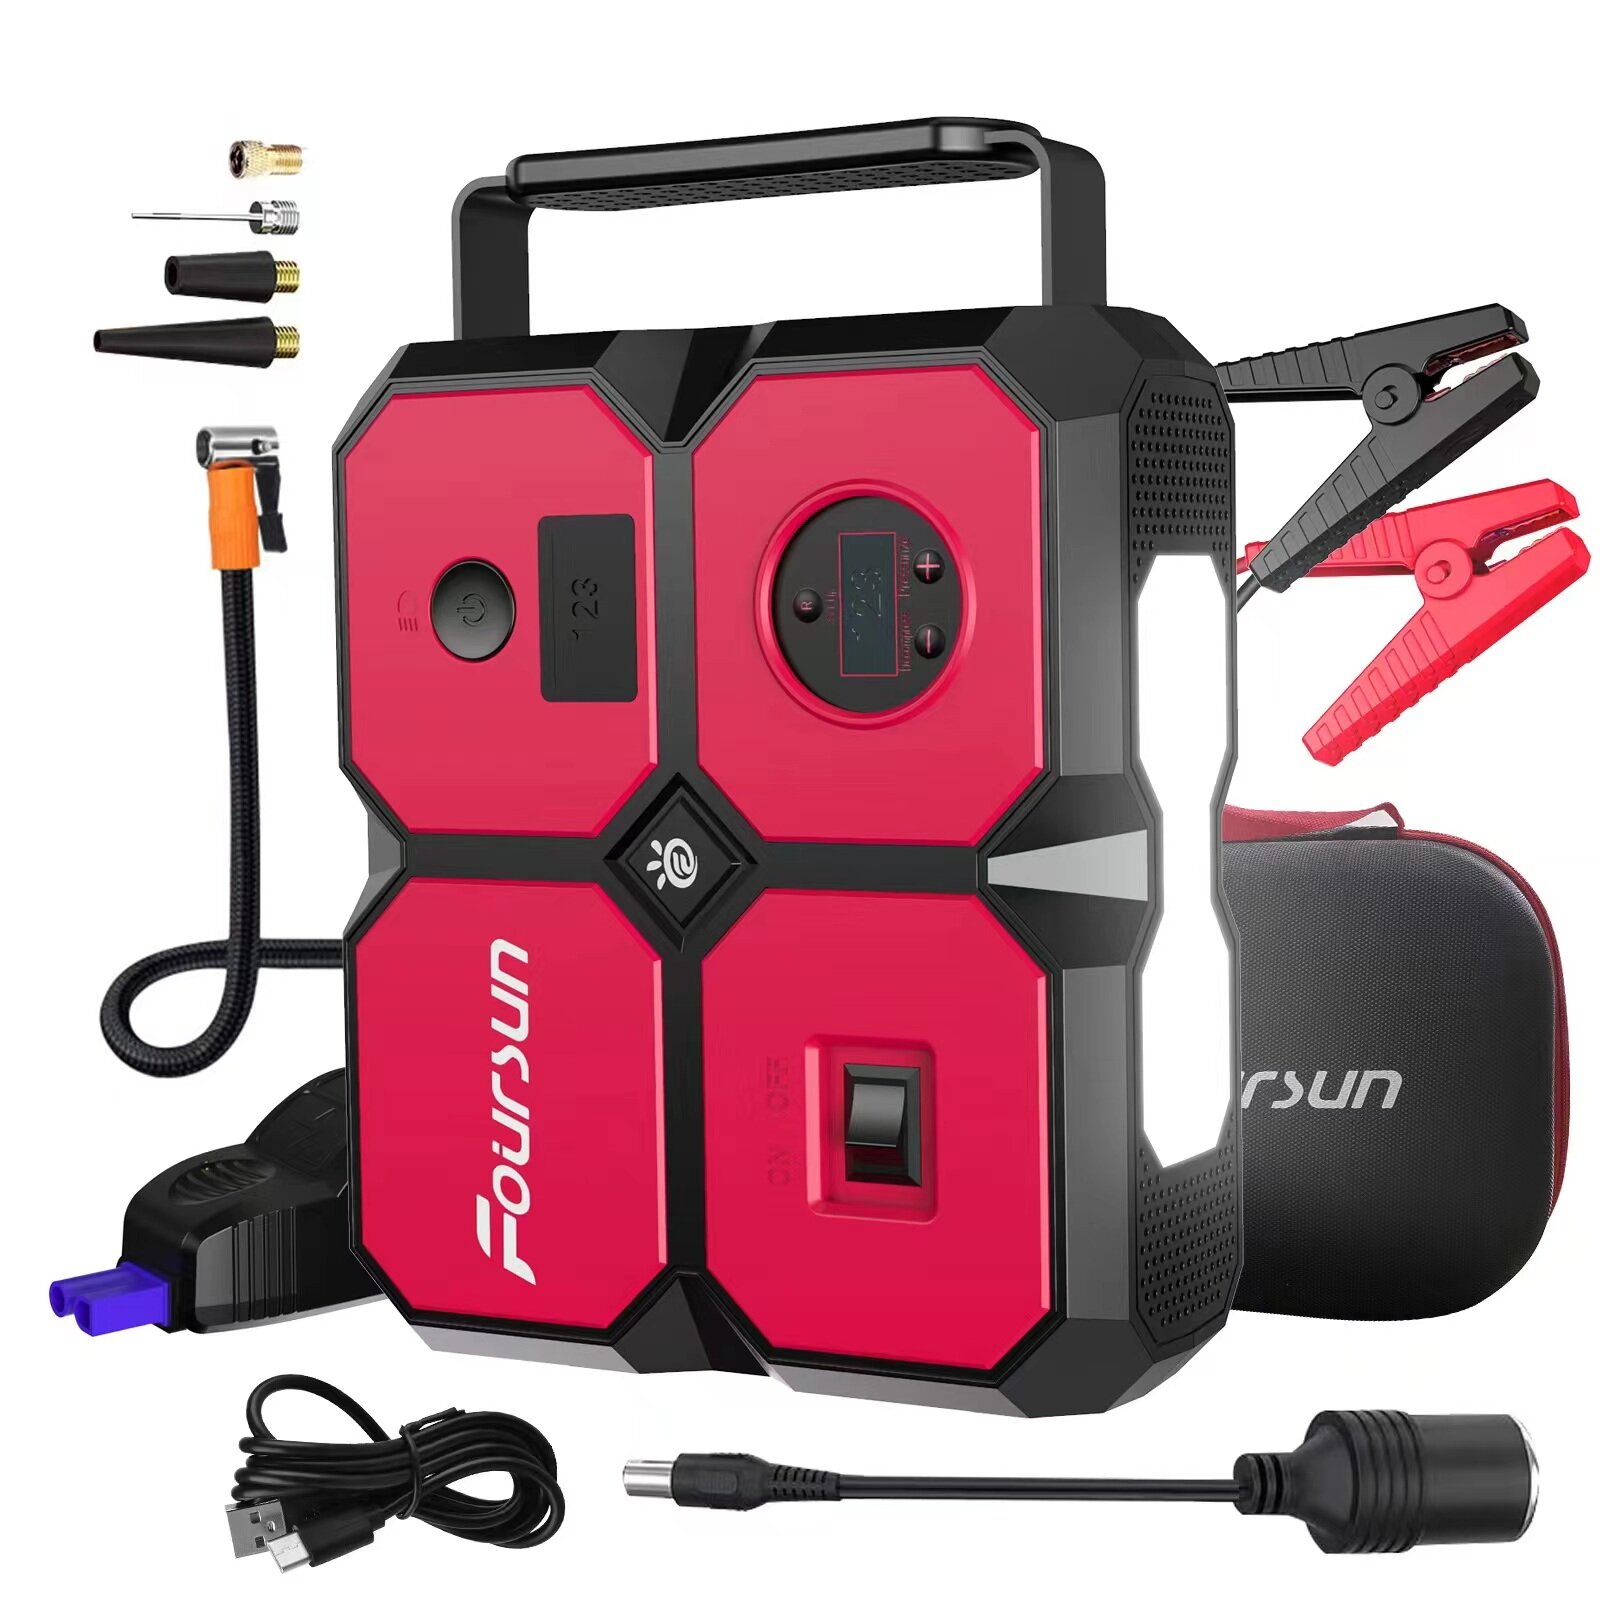 Foursun 26800Mah 4000A Portable Car Jump Starter with Air Compressor 25Bars Digital Tire Inflator with LED Light